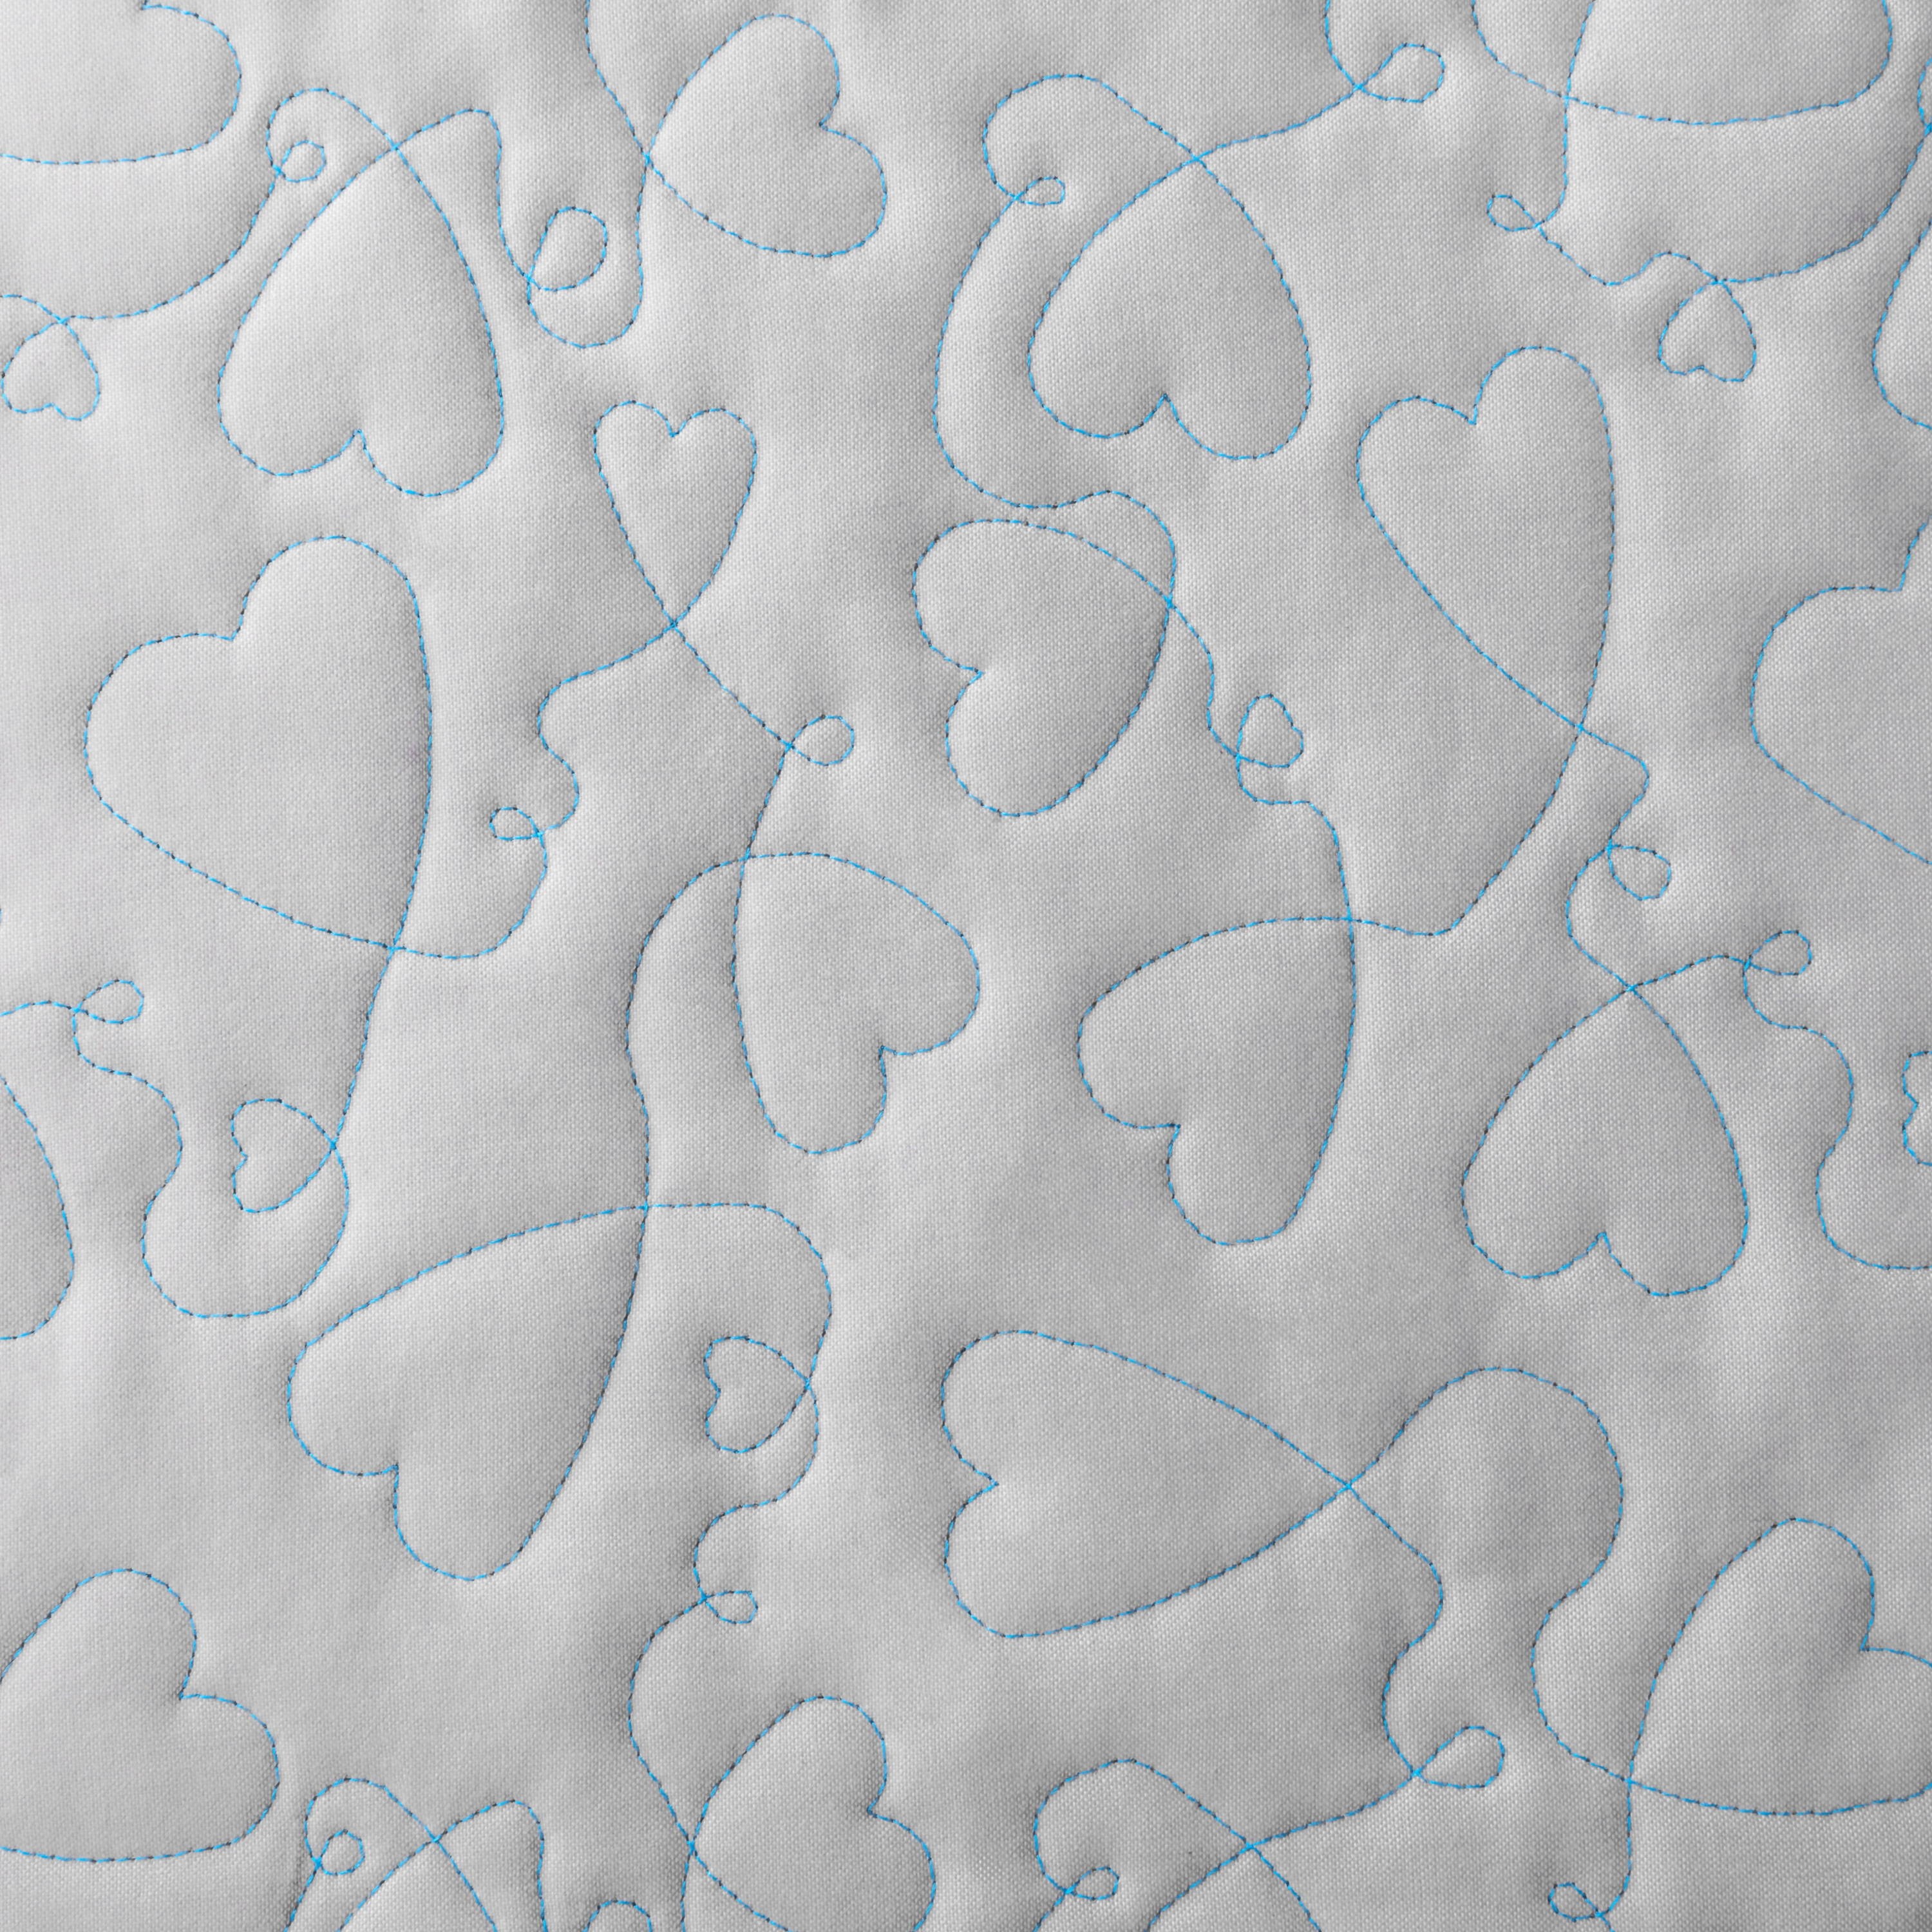 hearts and loops machine quilting pattern